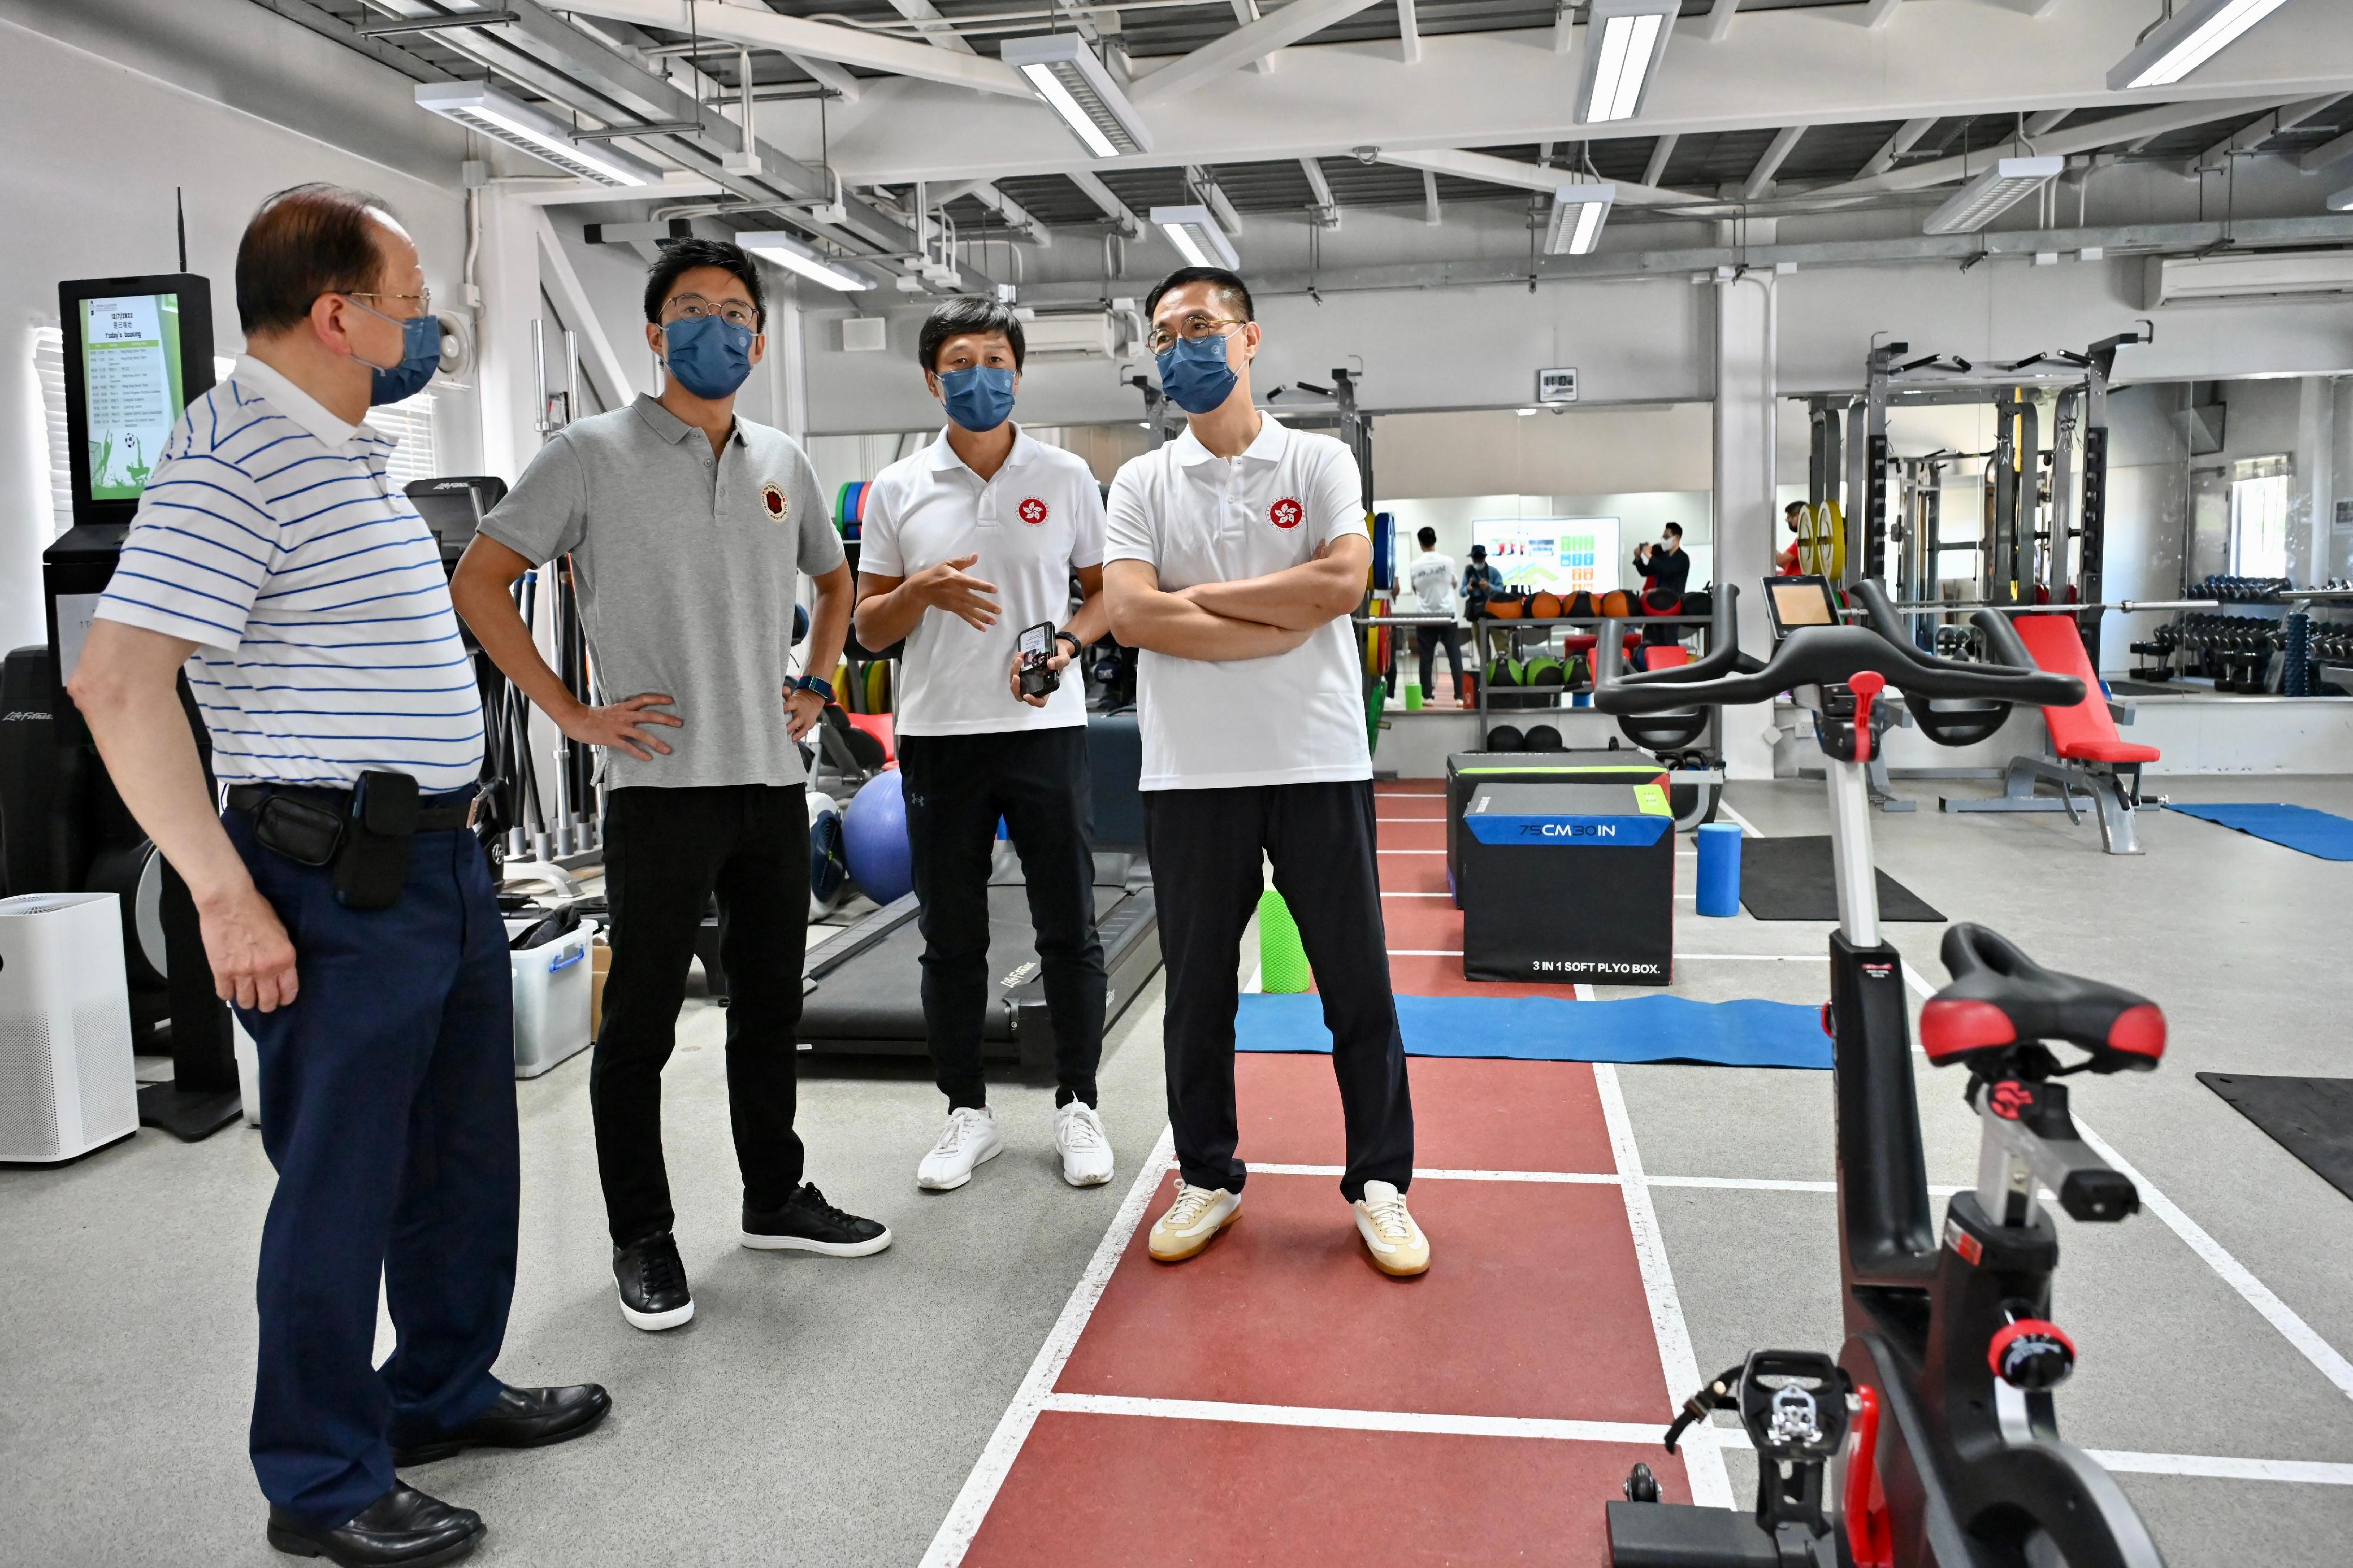 The Secretary for Culture, Sports and Tourism, Mr Kevin Yeung, visited the Jockey Club Hong Kong Football Association Football Training Centre today (July 13). Photo shows Mr Yeung (first right) taking a tour of the gym room, learning about the training of the Hong Kong football team.